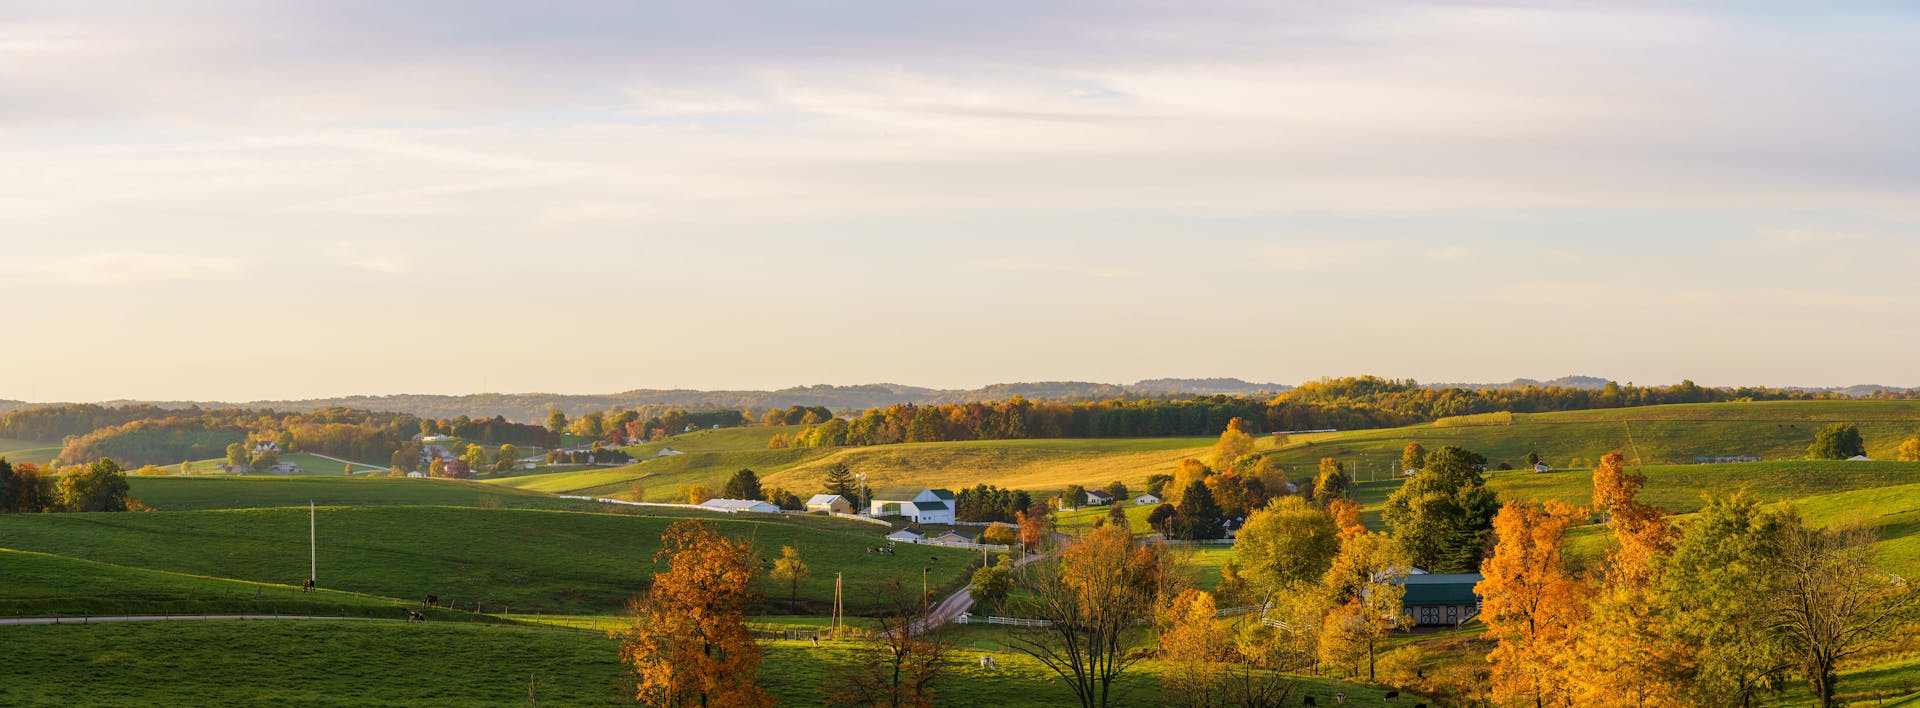 A look out across the rolling hills of Holmes County during autumn